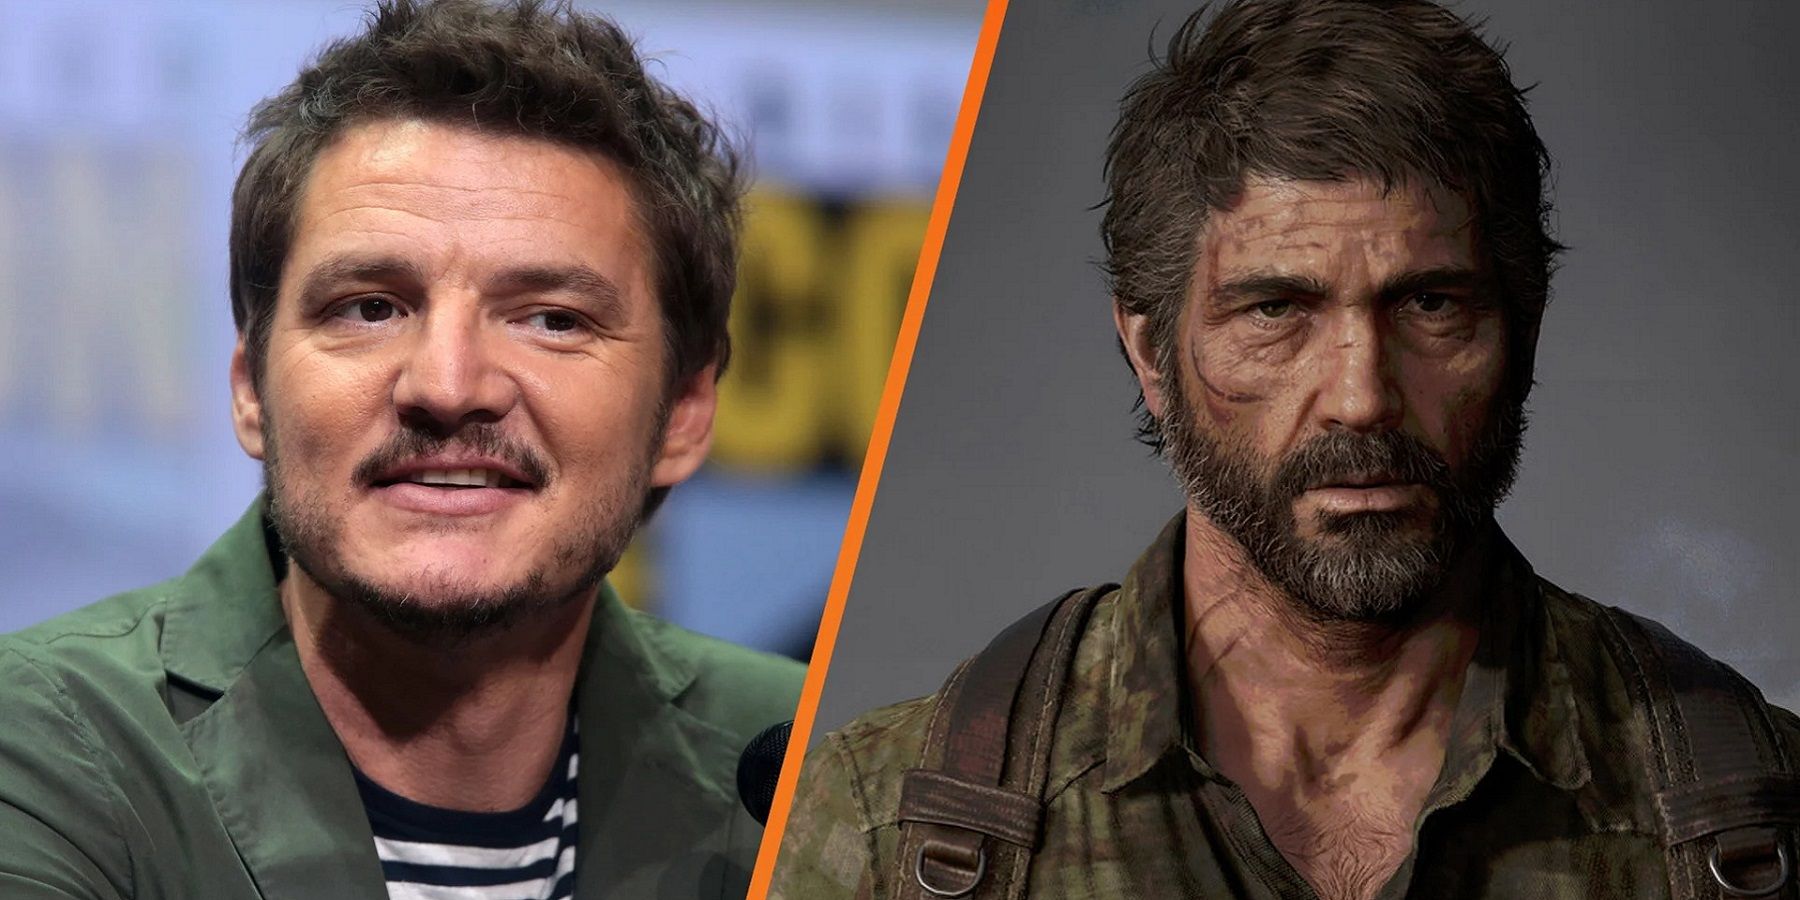 An image of actor Pedro Pascal on the left and Joel from The Last of Us on the right.